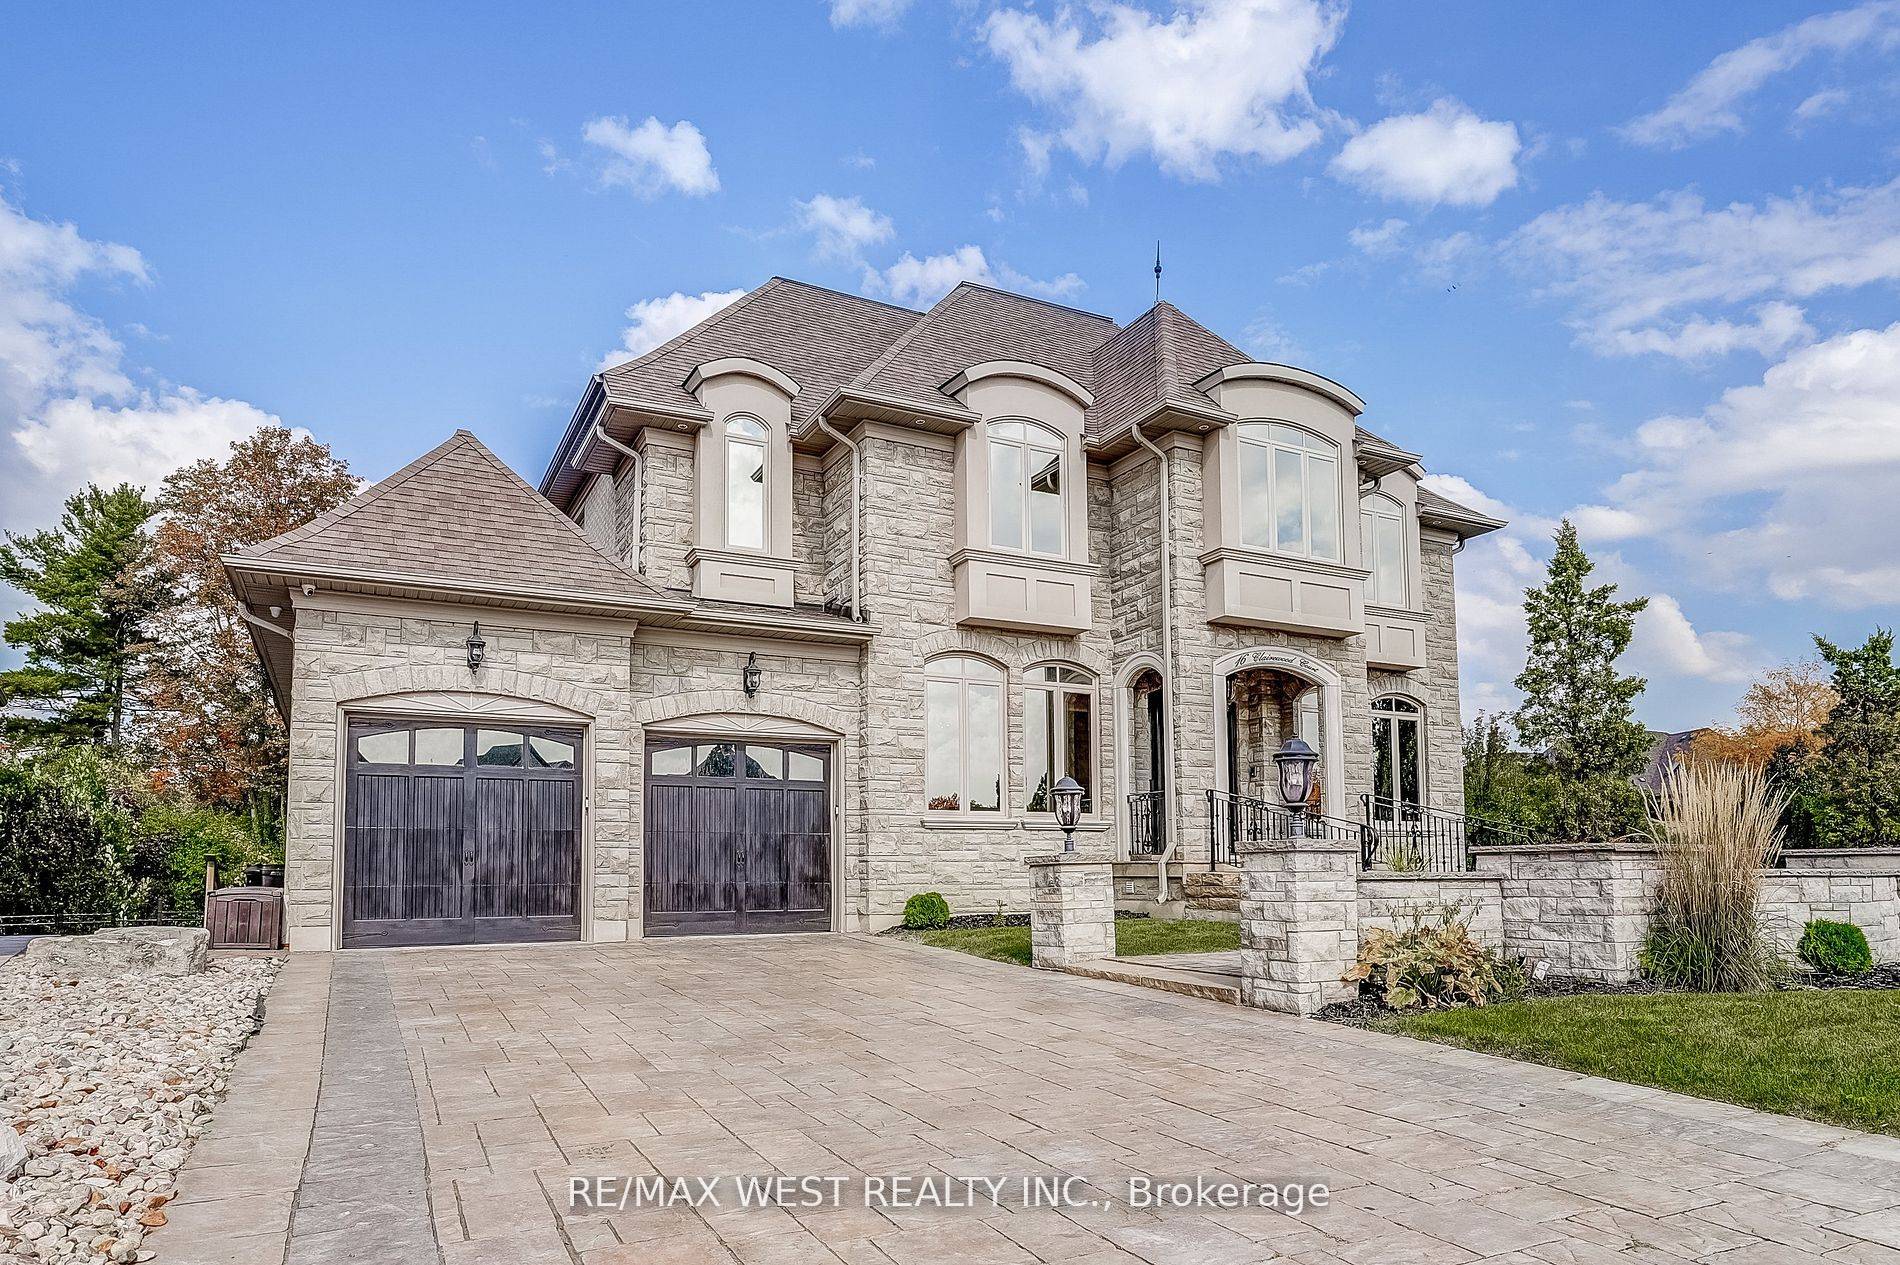 Welcome to a truly extraordinary custom built home in Kleinburg's most desirable estate area located on a Cul de sac.